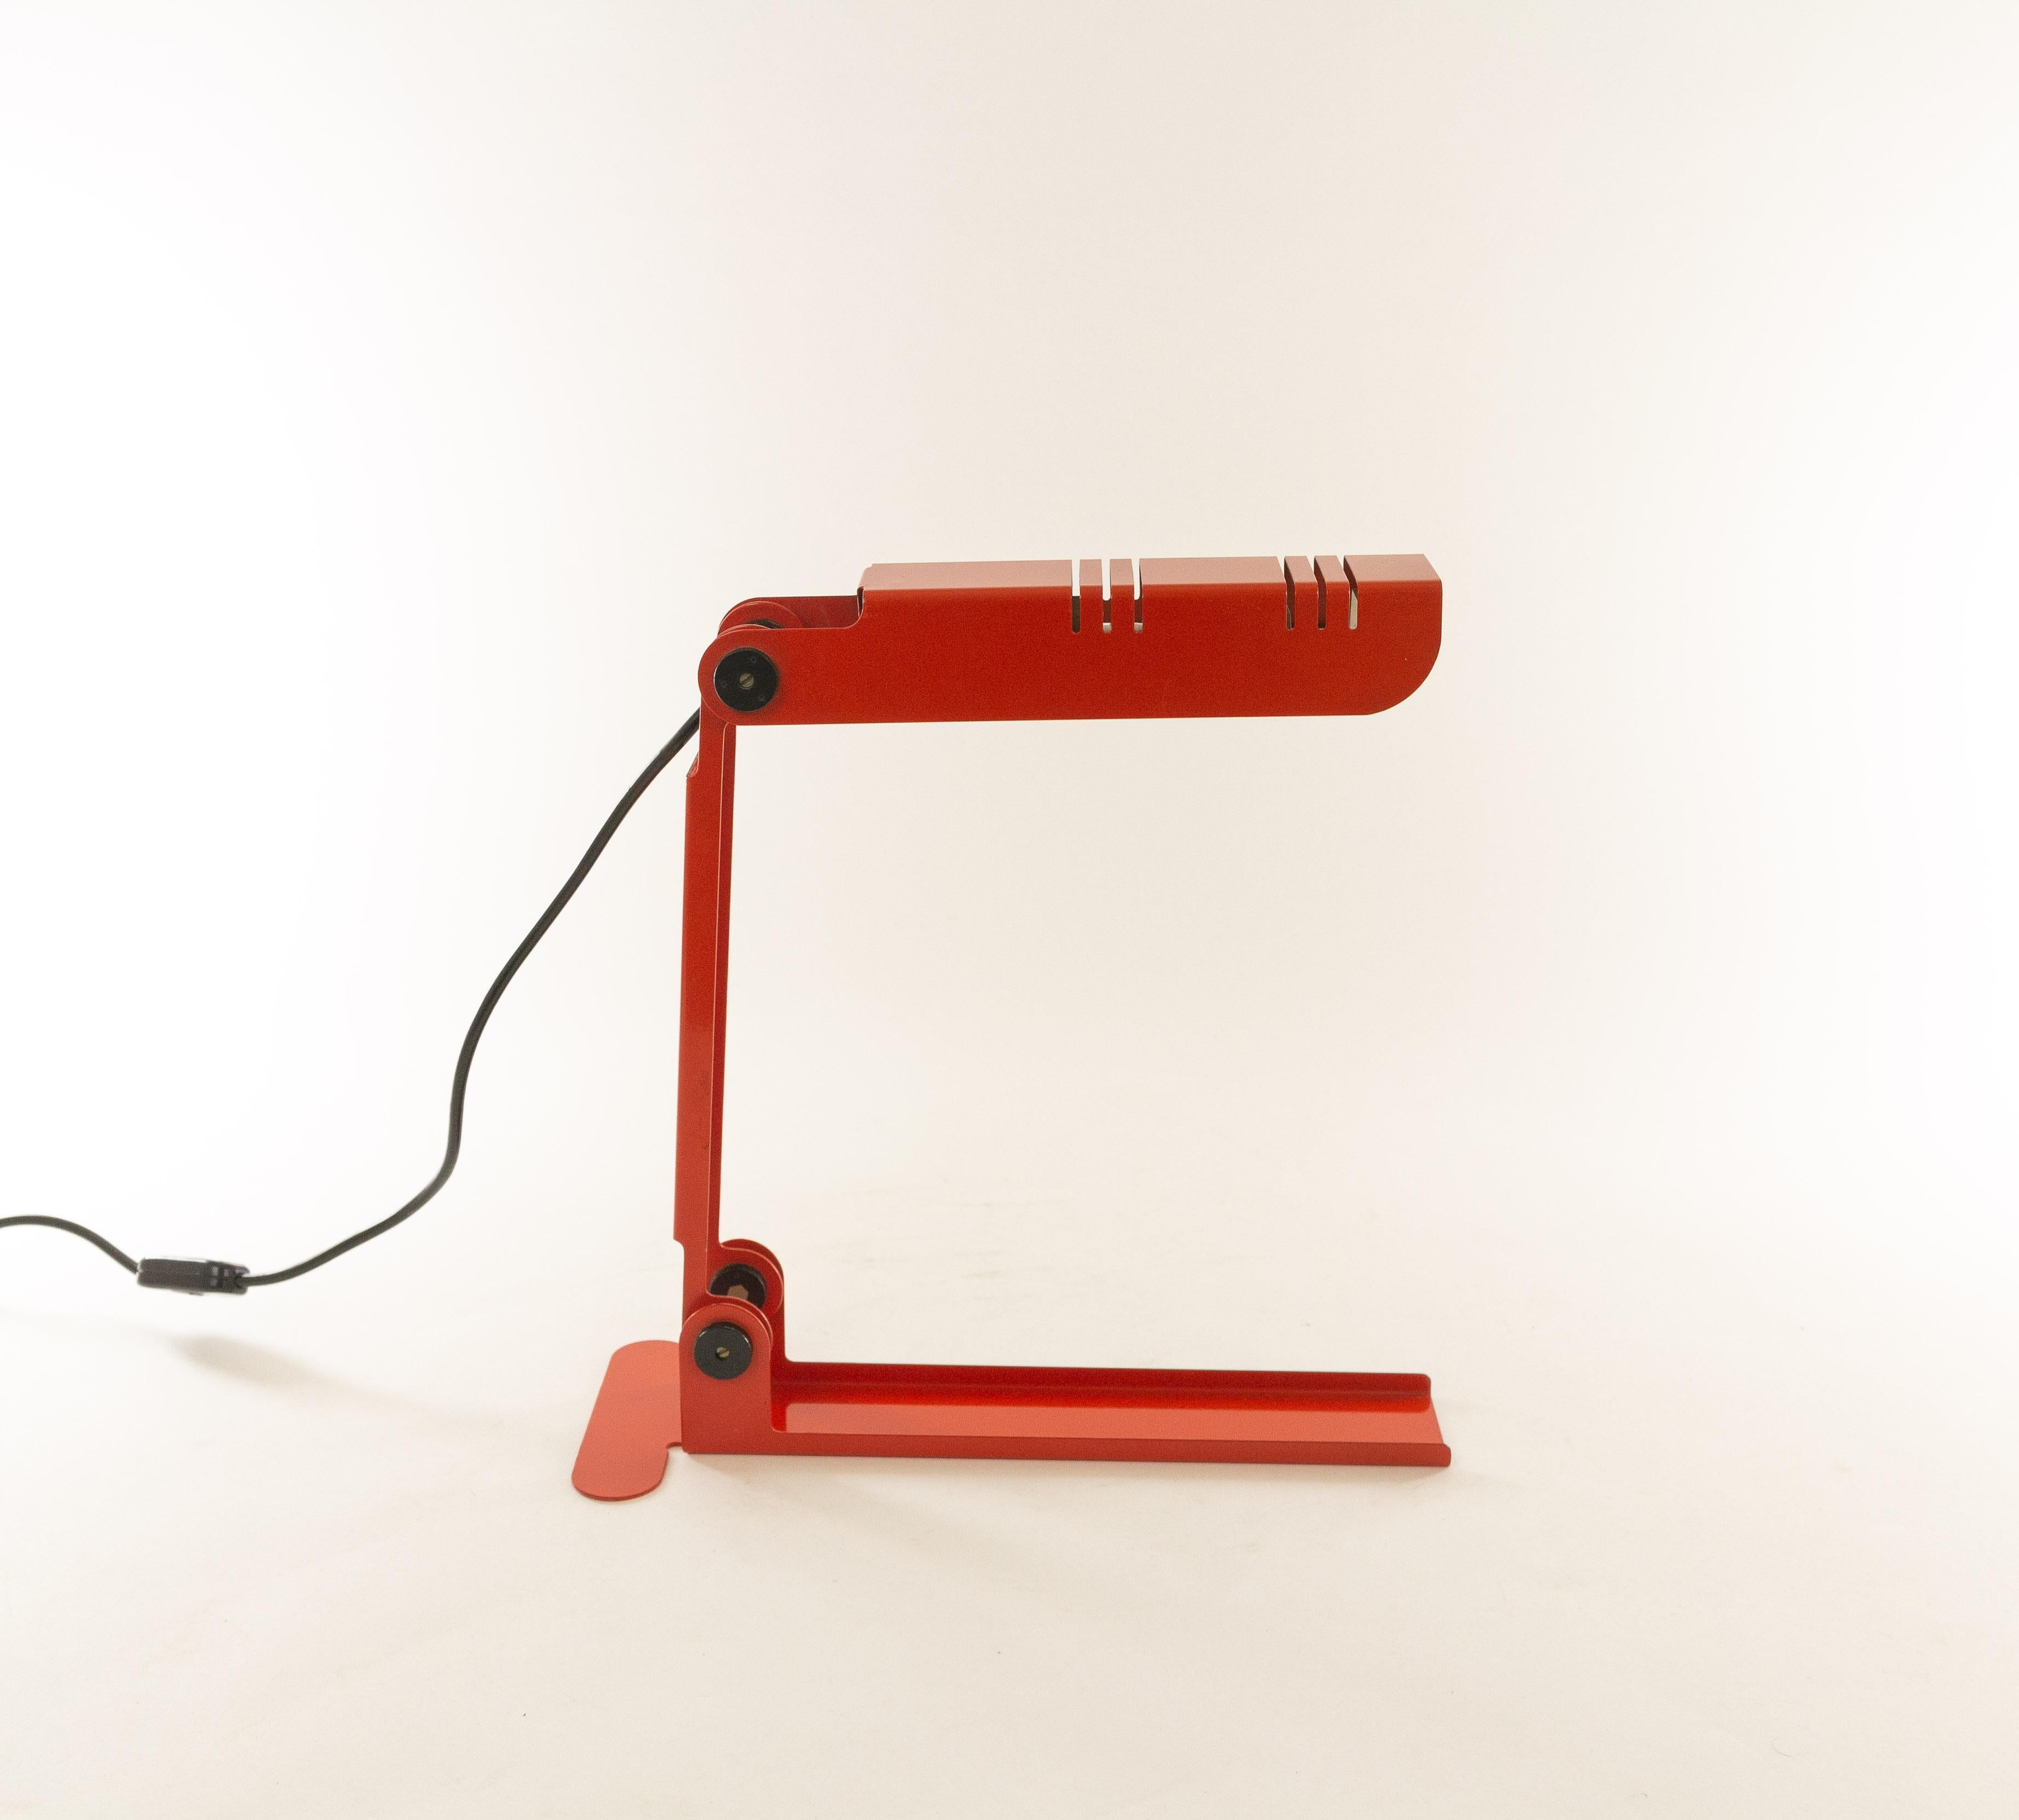 Nana is a playful table lamp that was designed by Carlo Nason and produced by Lumenform in the 1980s.

The lamp can be placed in different positions, from fully collapsed so that it takes up almost no space, to fully unfolded so that it can serve